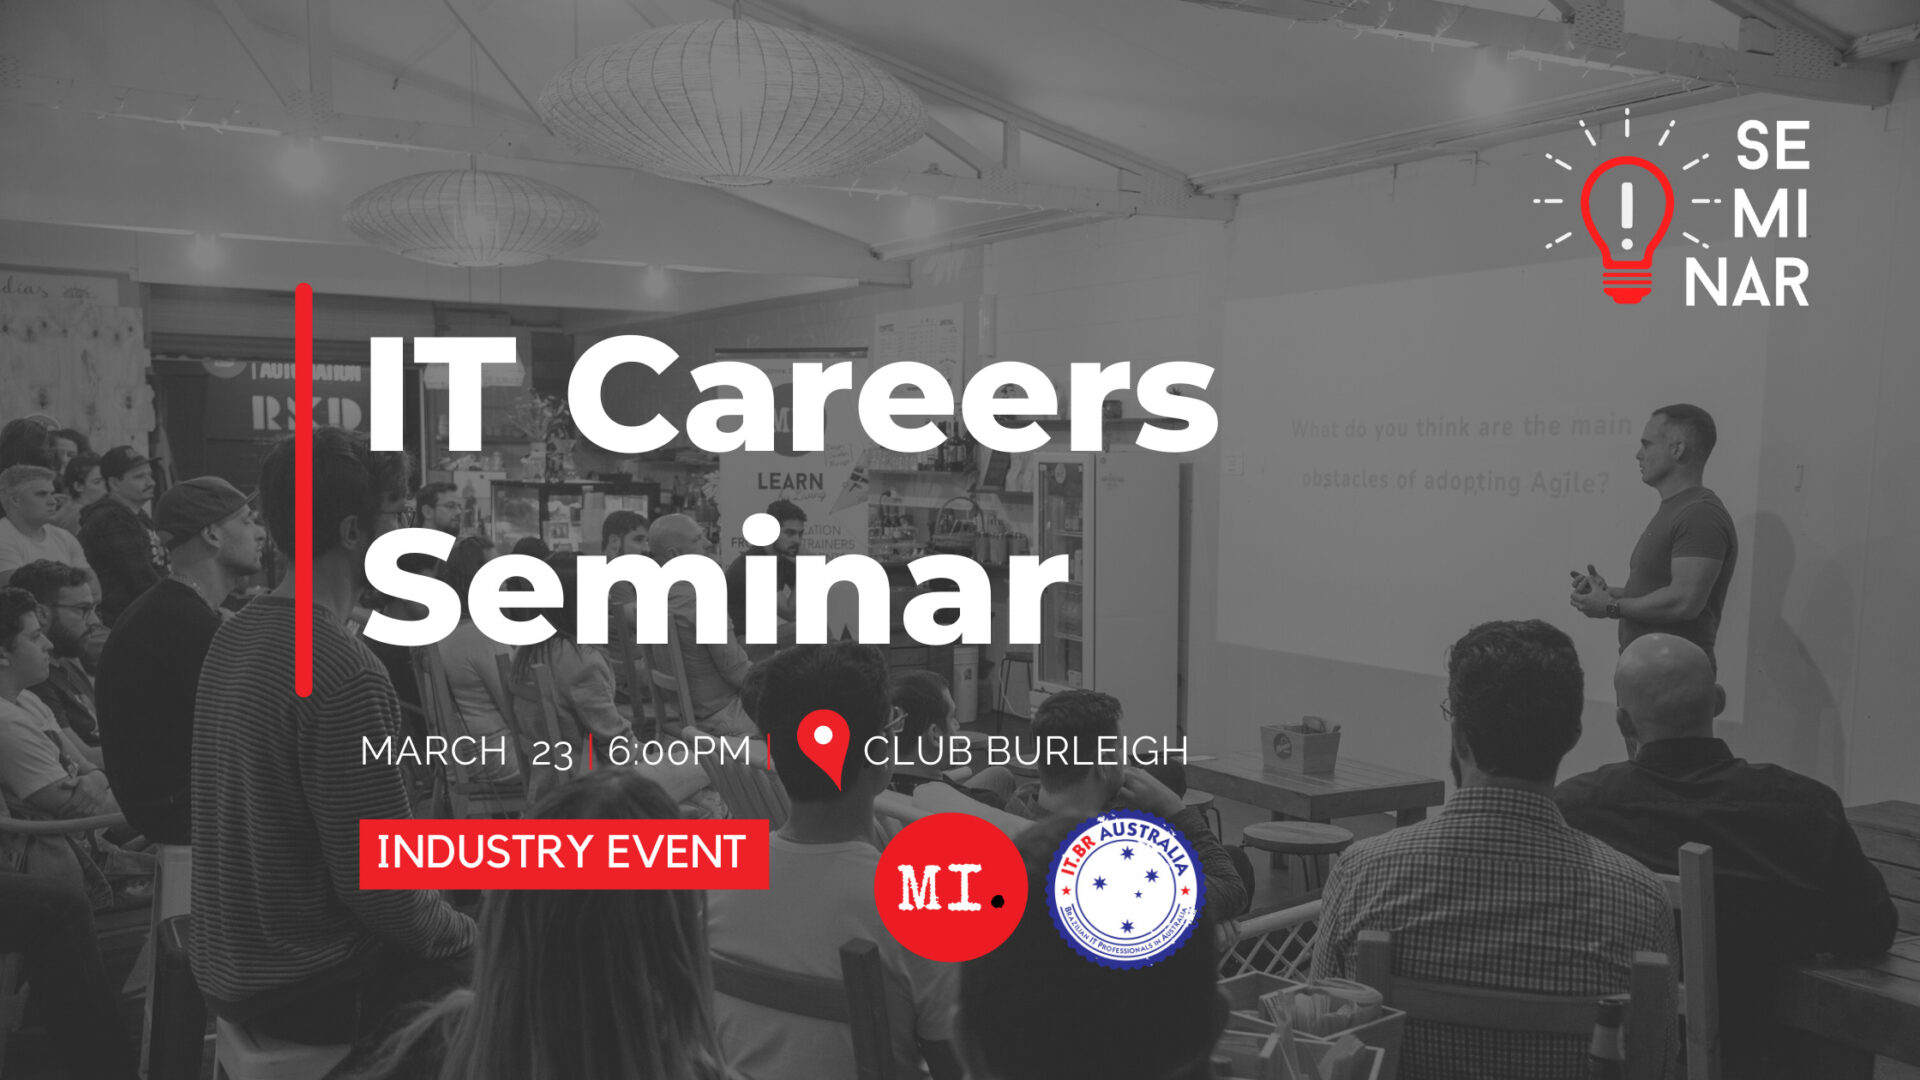 Unlock Your Future in IT: Join Mindroom Innovation and IT.BR for a Dynamic Careers Seminar!